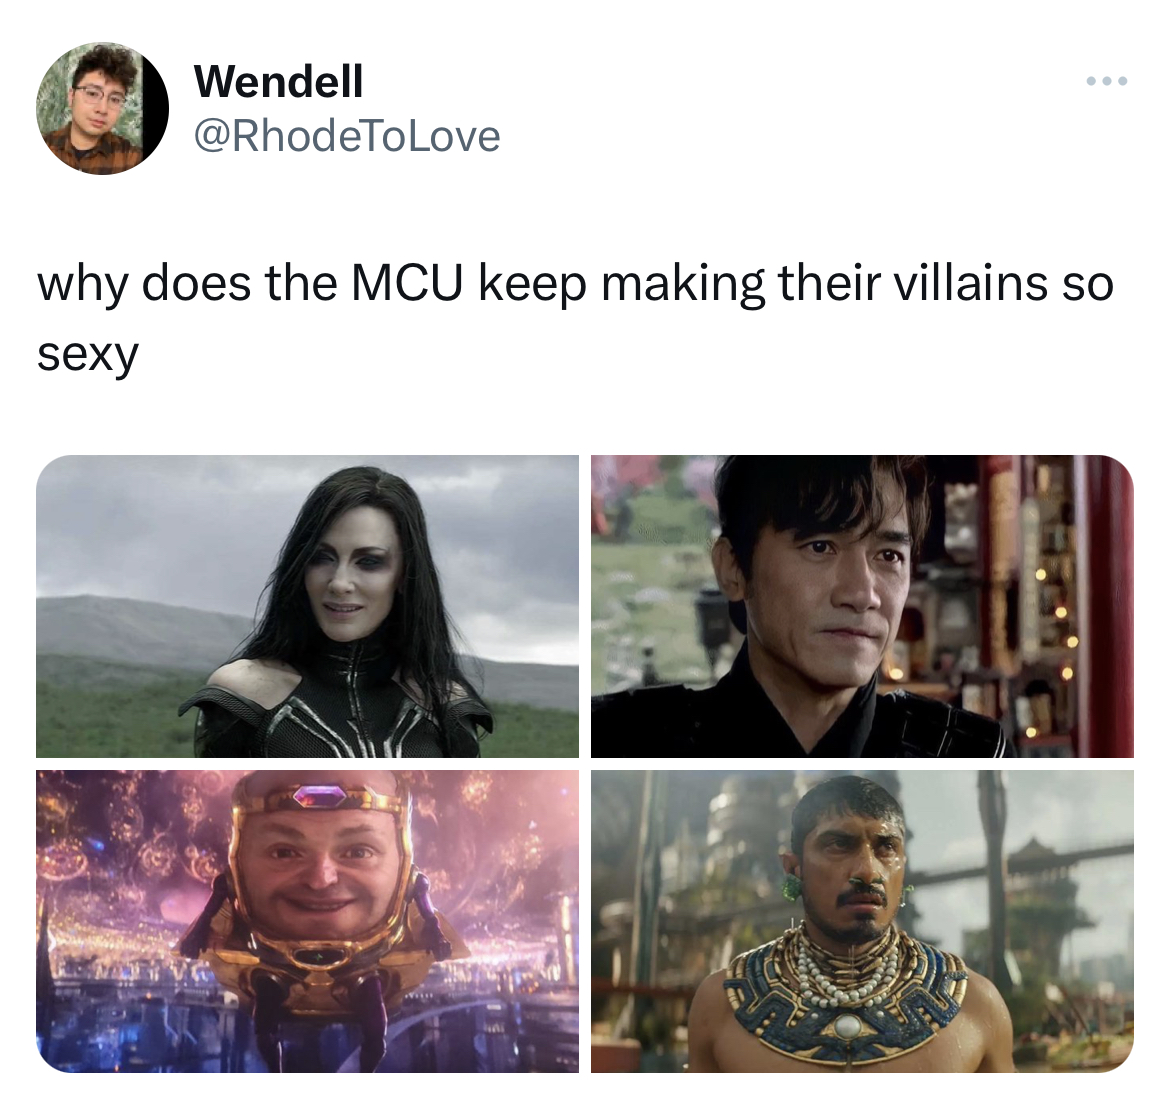 Tweets dunking on celebs - media - Wendell why does the Mcu keep making their villains so sexy